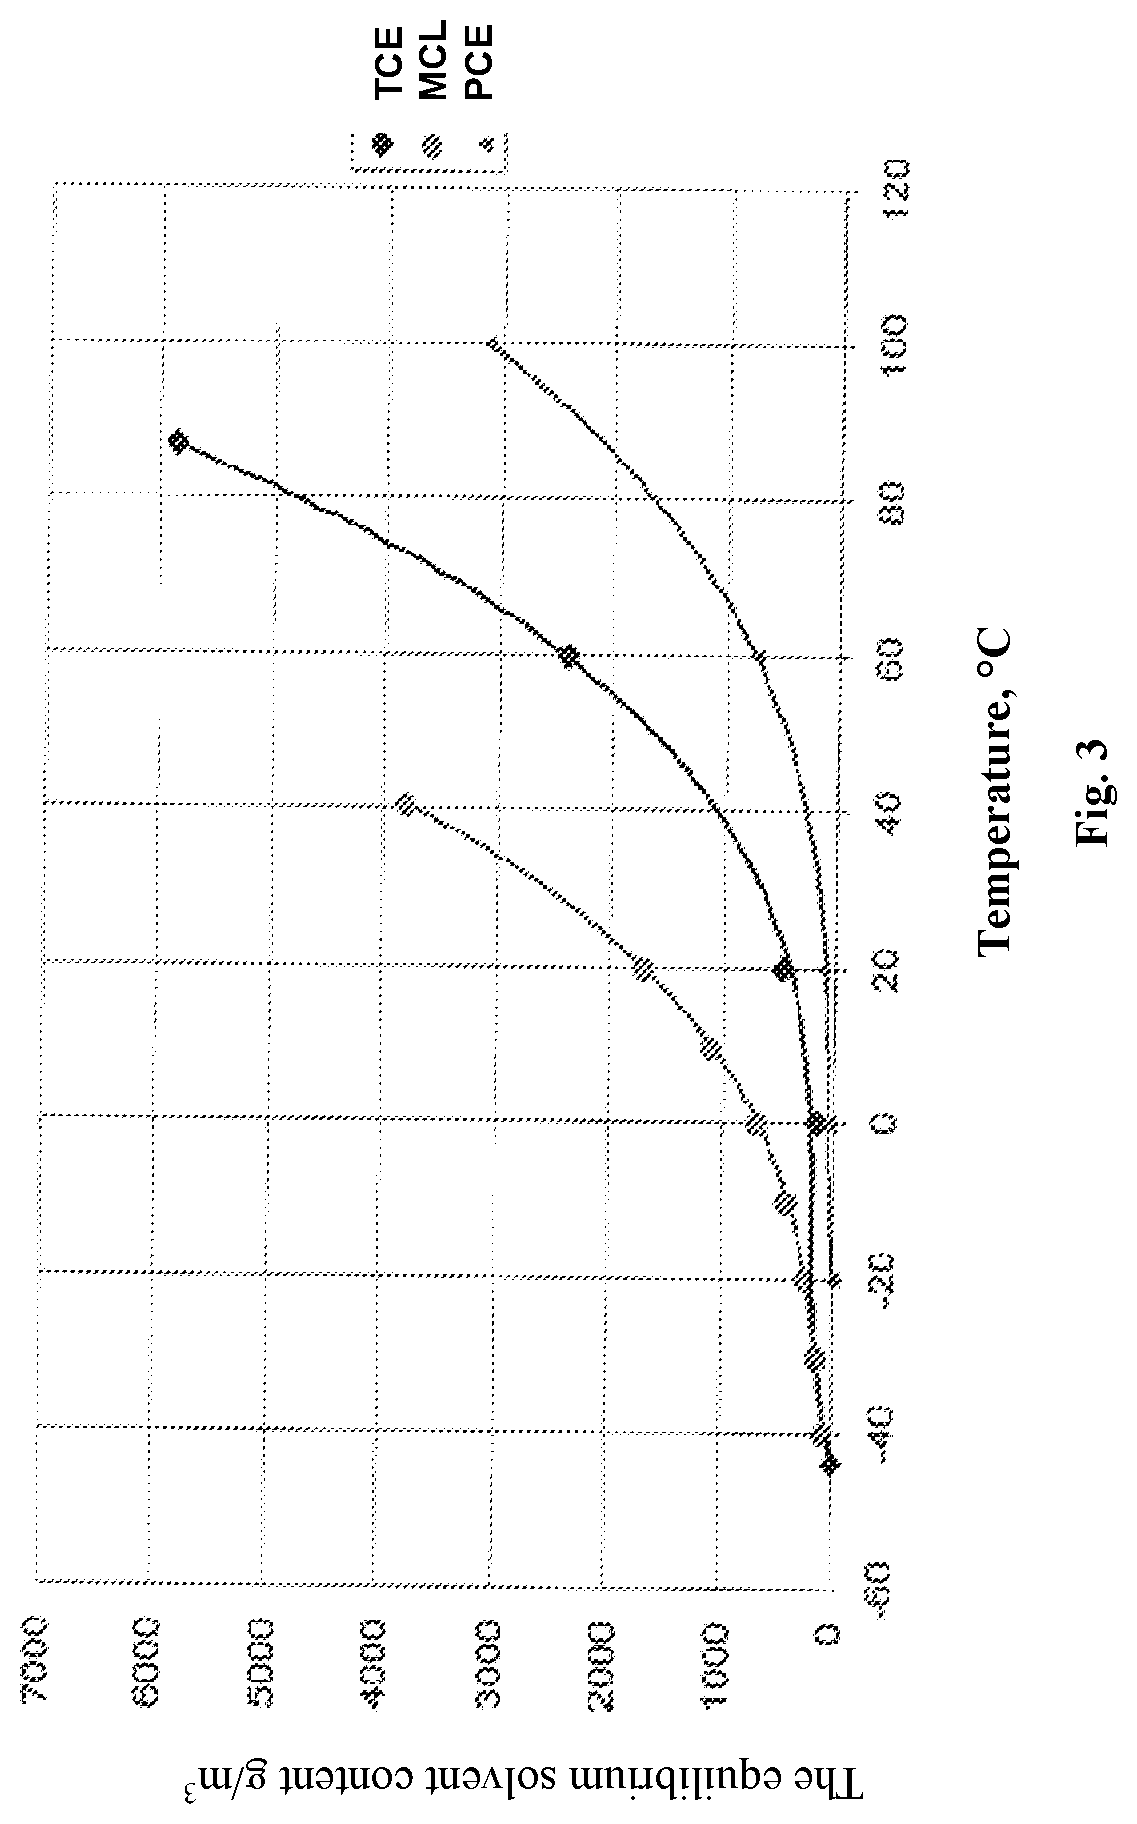 Method of producing granular sorbent for extracting lithium from lithium-containing brine